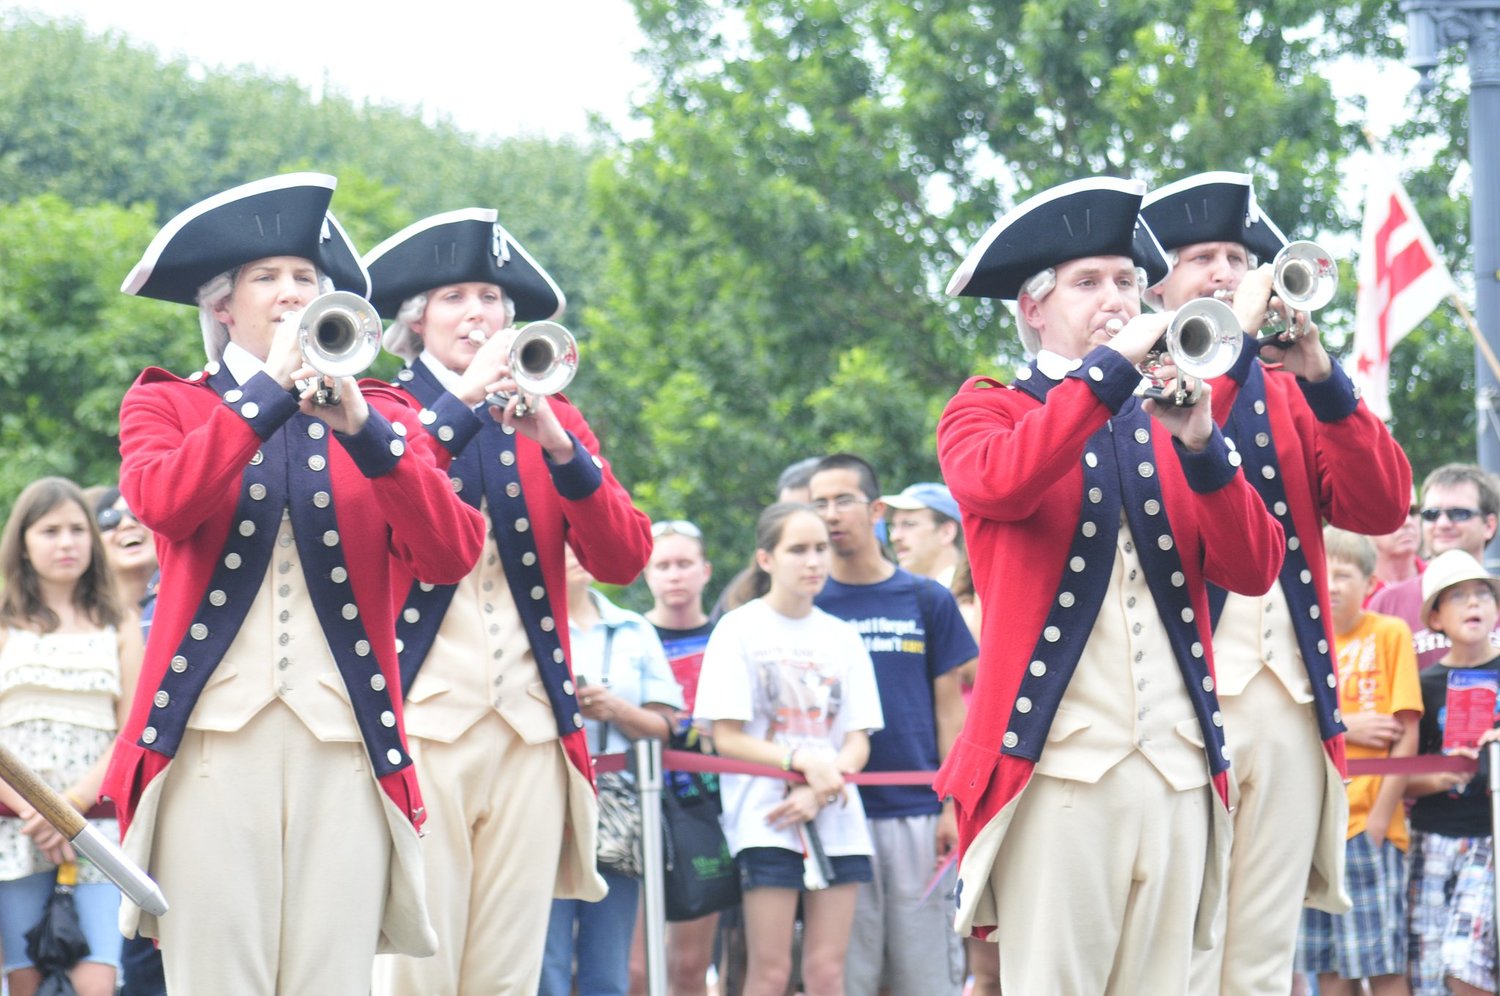 See the U.S. Army Old Guard Fife and Drum Corps perform at Battleship Memorial Park.